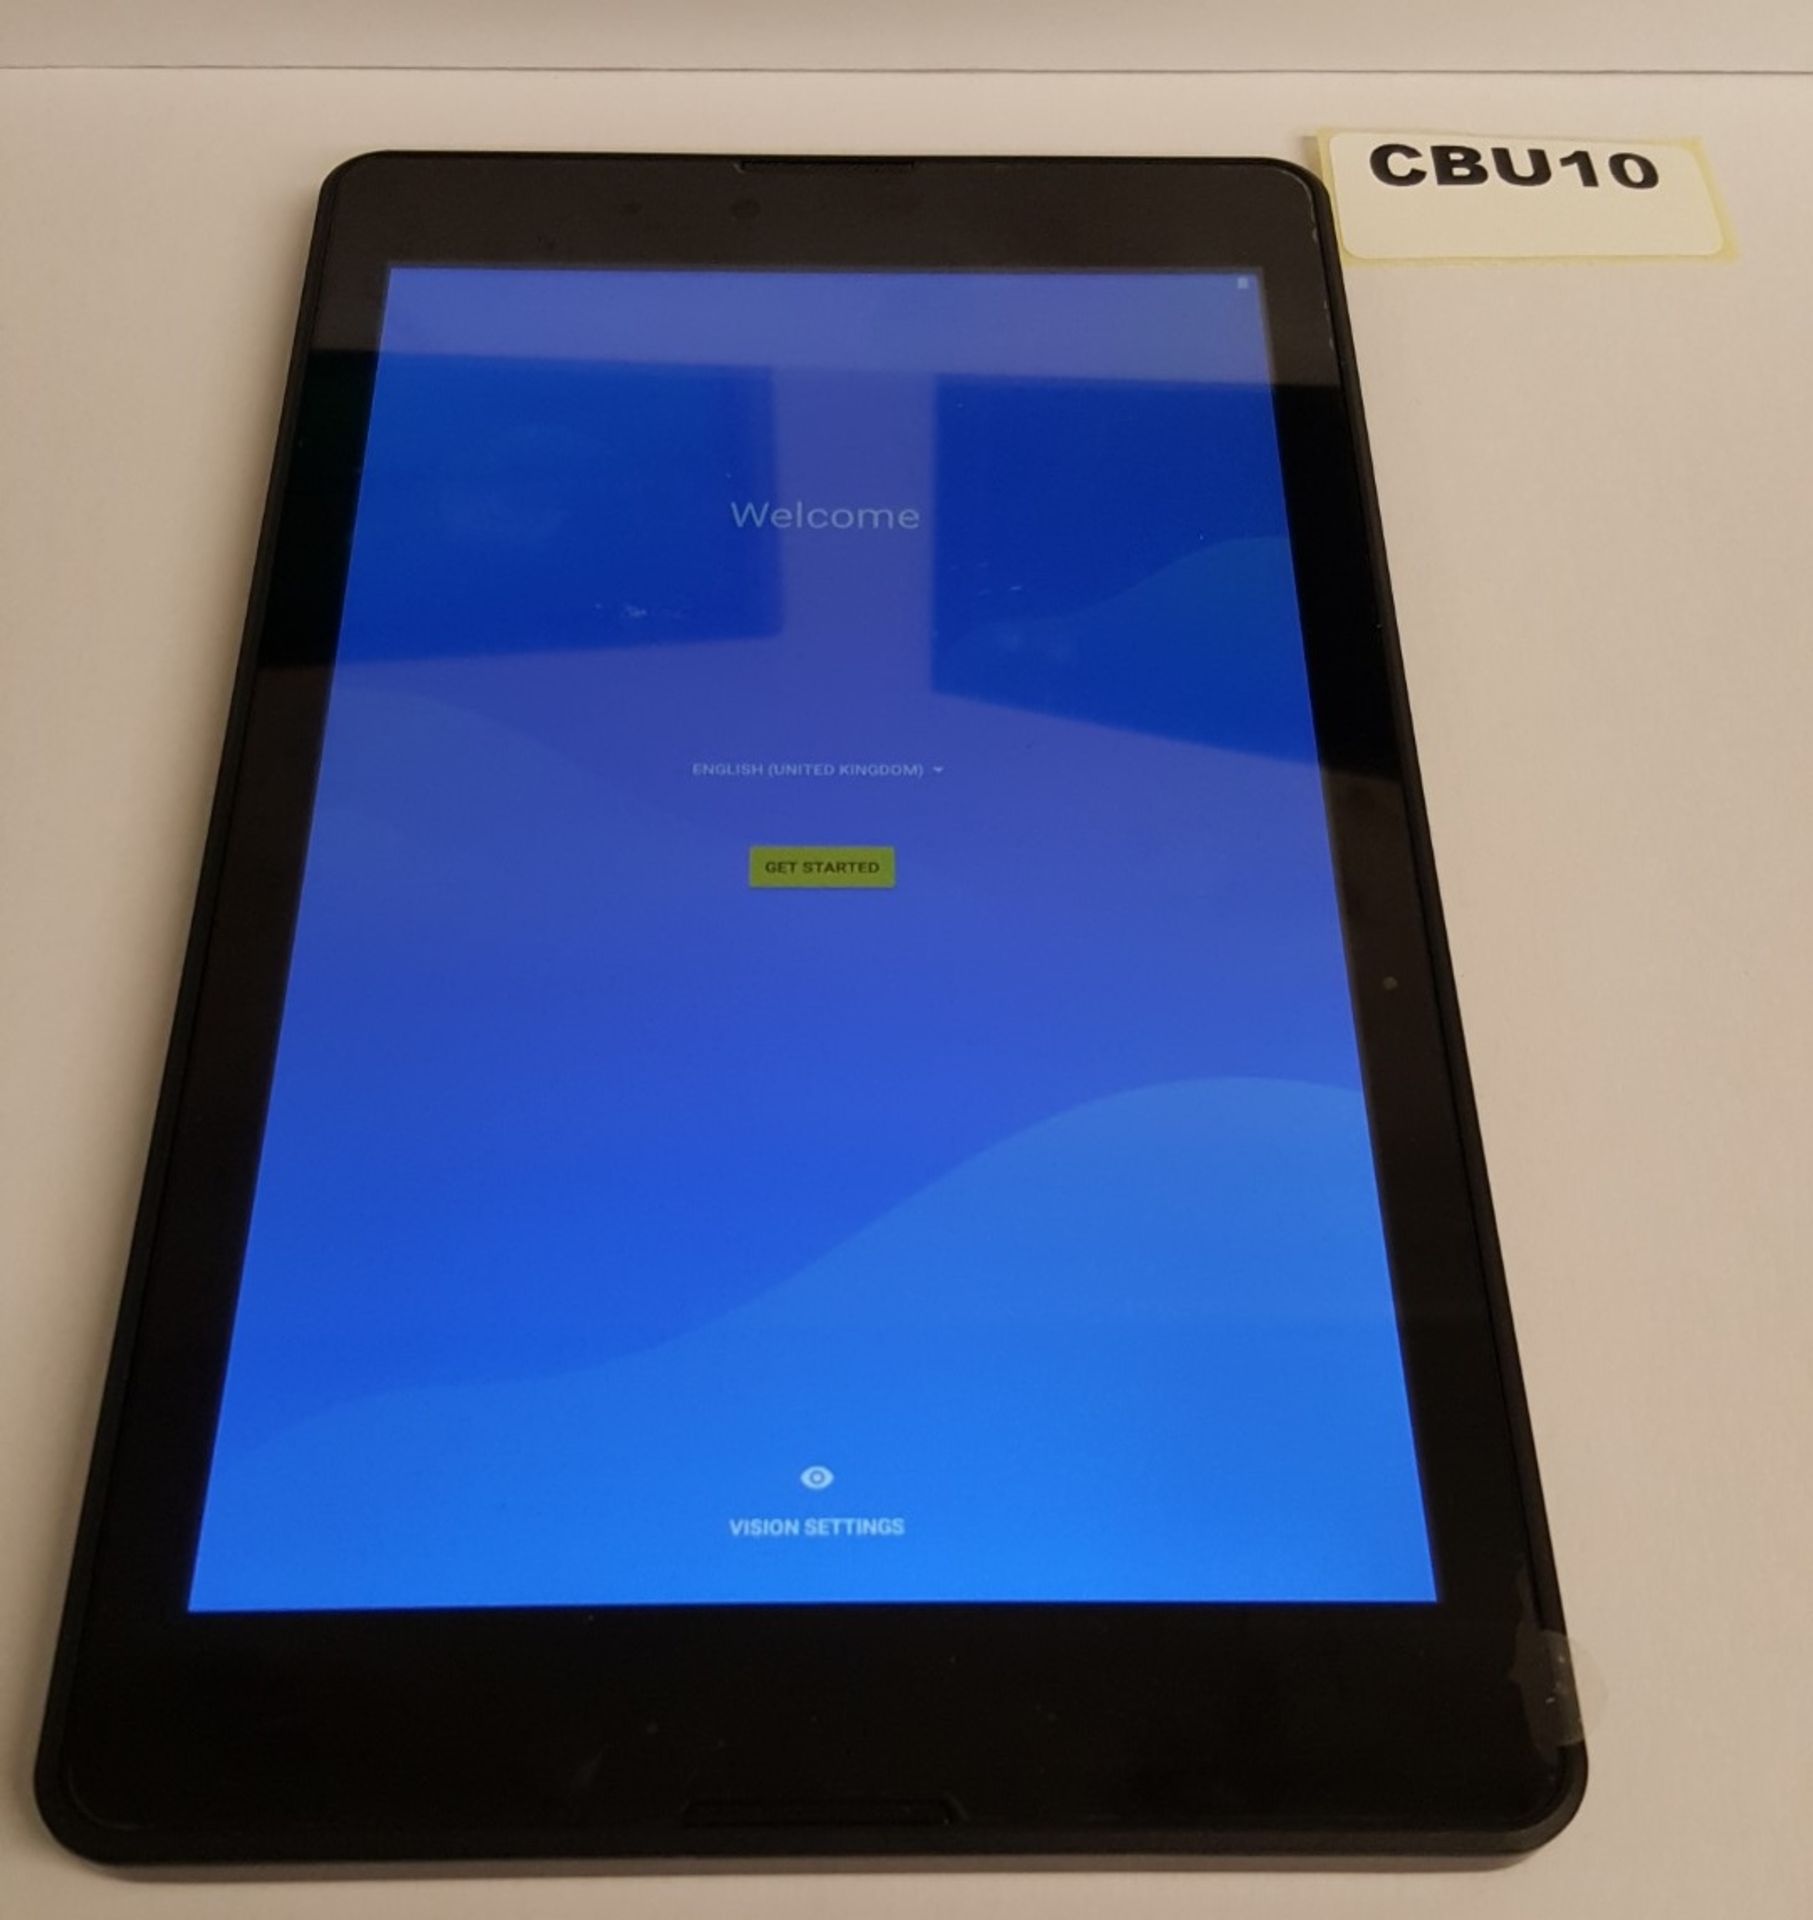 1 x Android SMB-H8009 Tablet - 16GB, WIFI, BLACK, 8.0 " - Ref CBU10 - Image 2 of 3